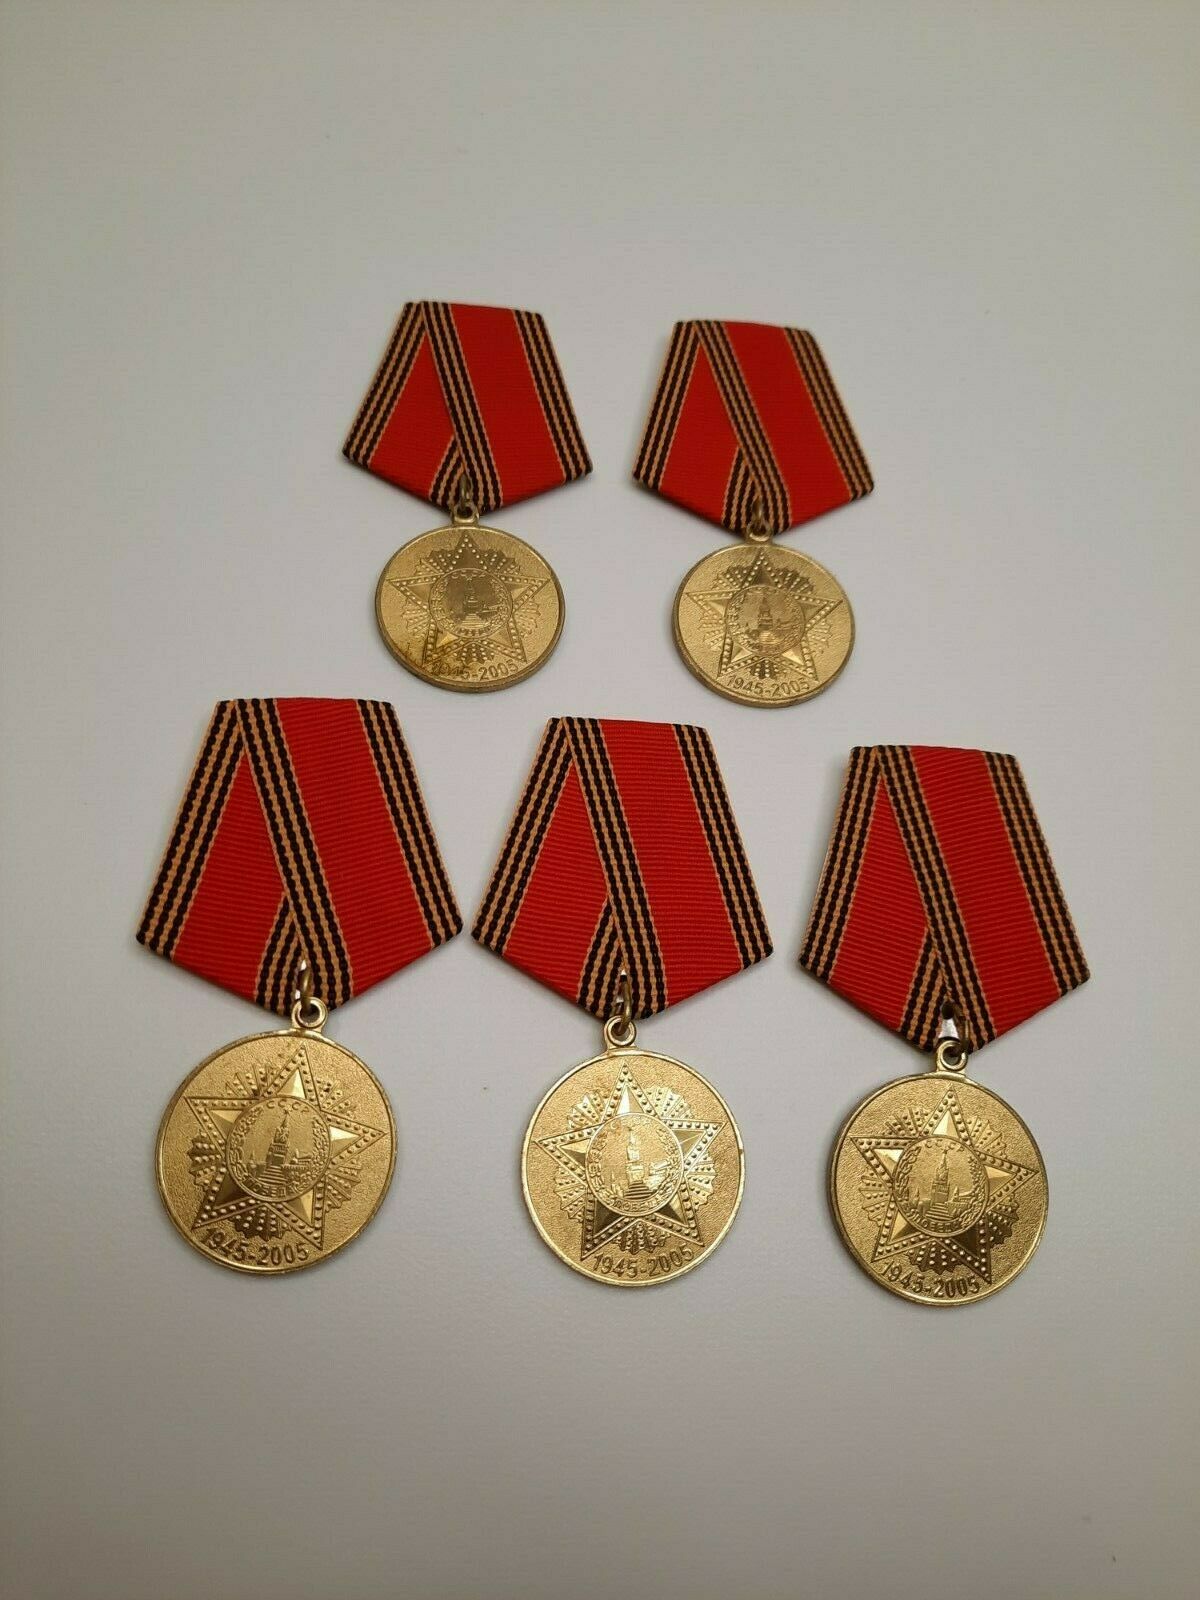 Vintage, Old, Rare, Antiques, Retro, Soviet Medals 60 Years Of Victory, Ussr